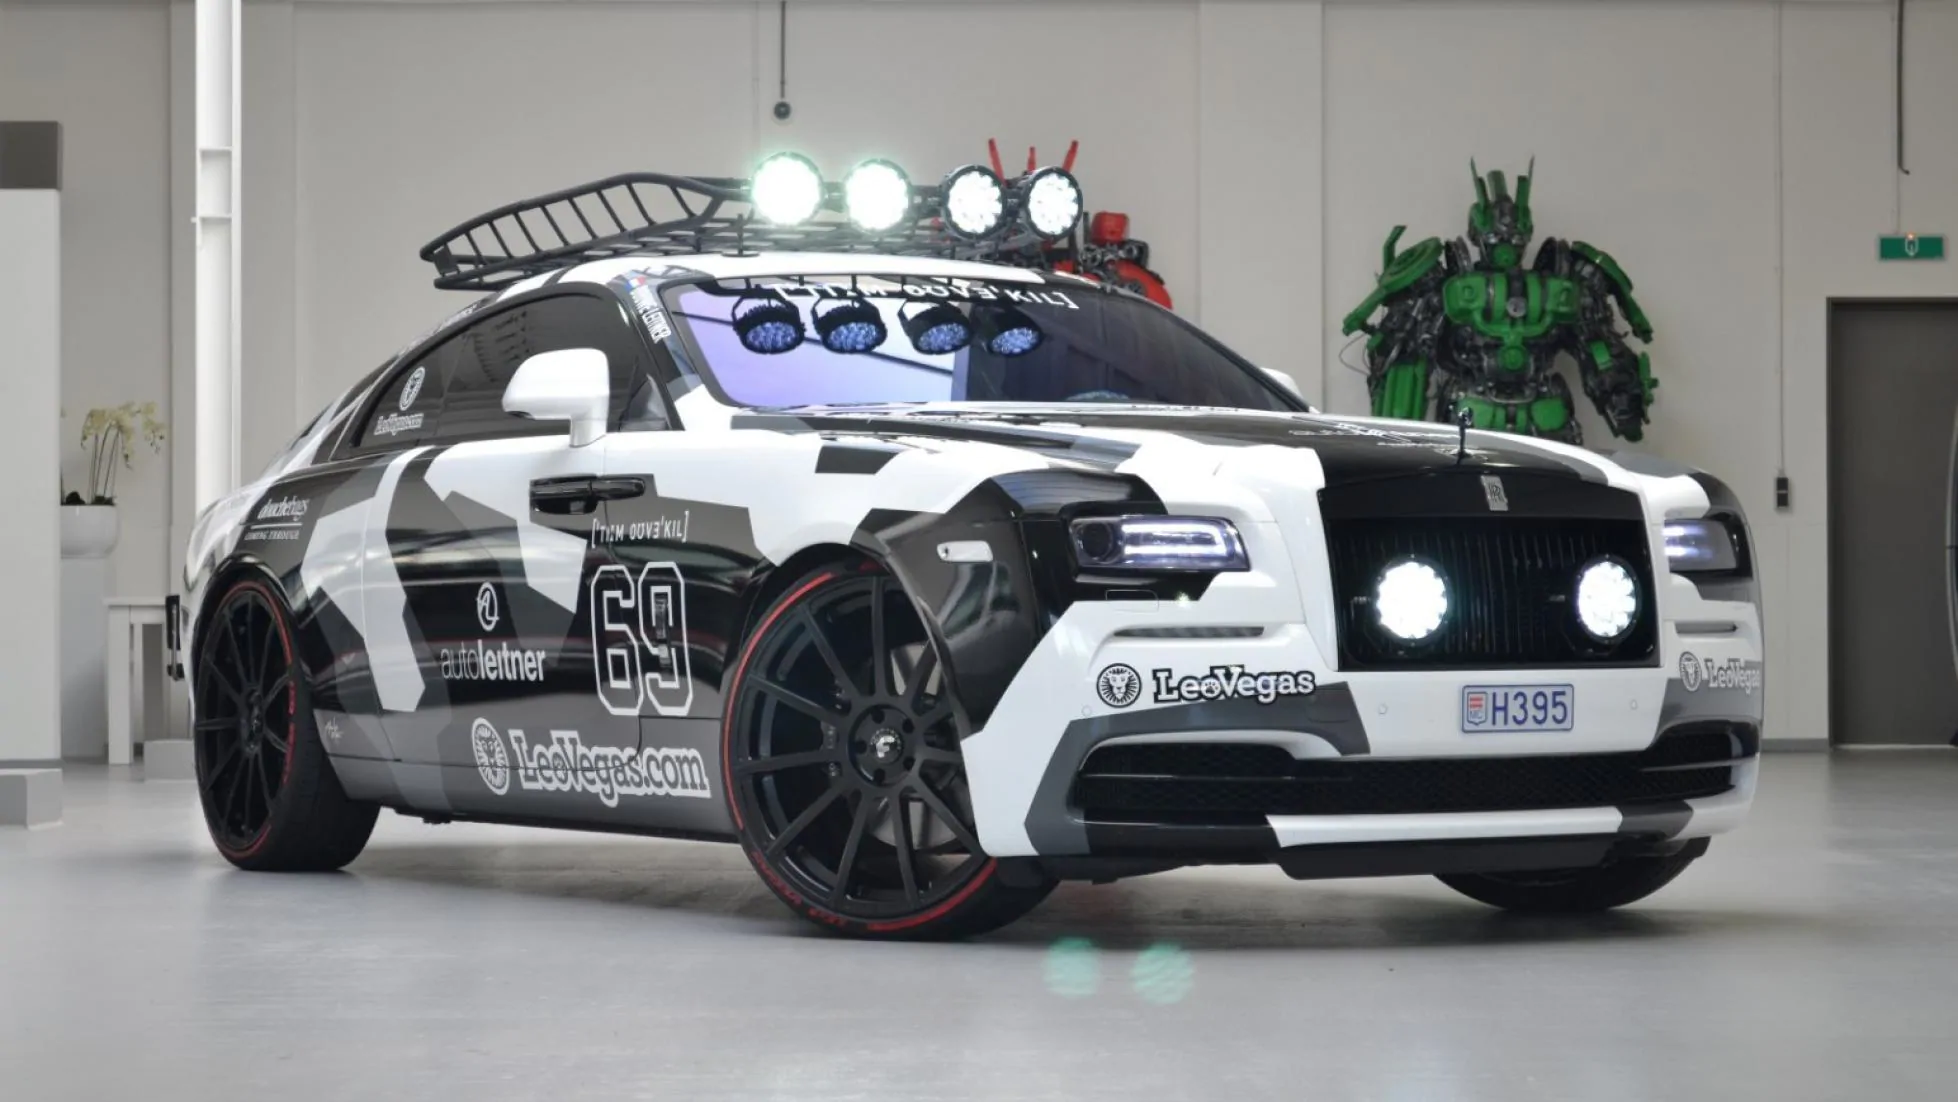 Jon Olsson’s Rolls-Royce Wraith ‘George’ Can Now Be Yours